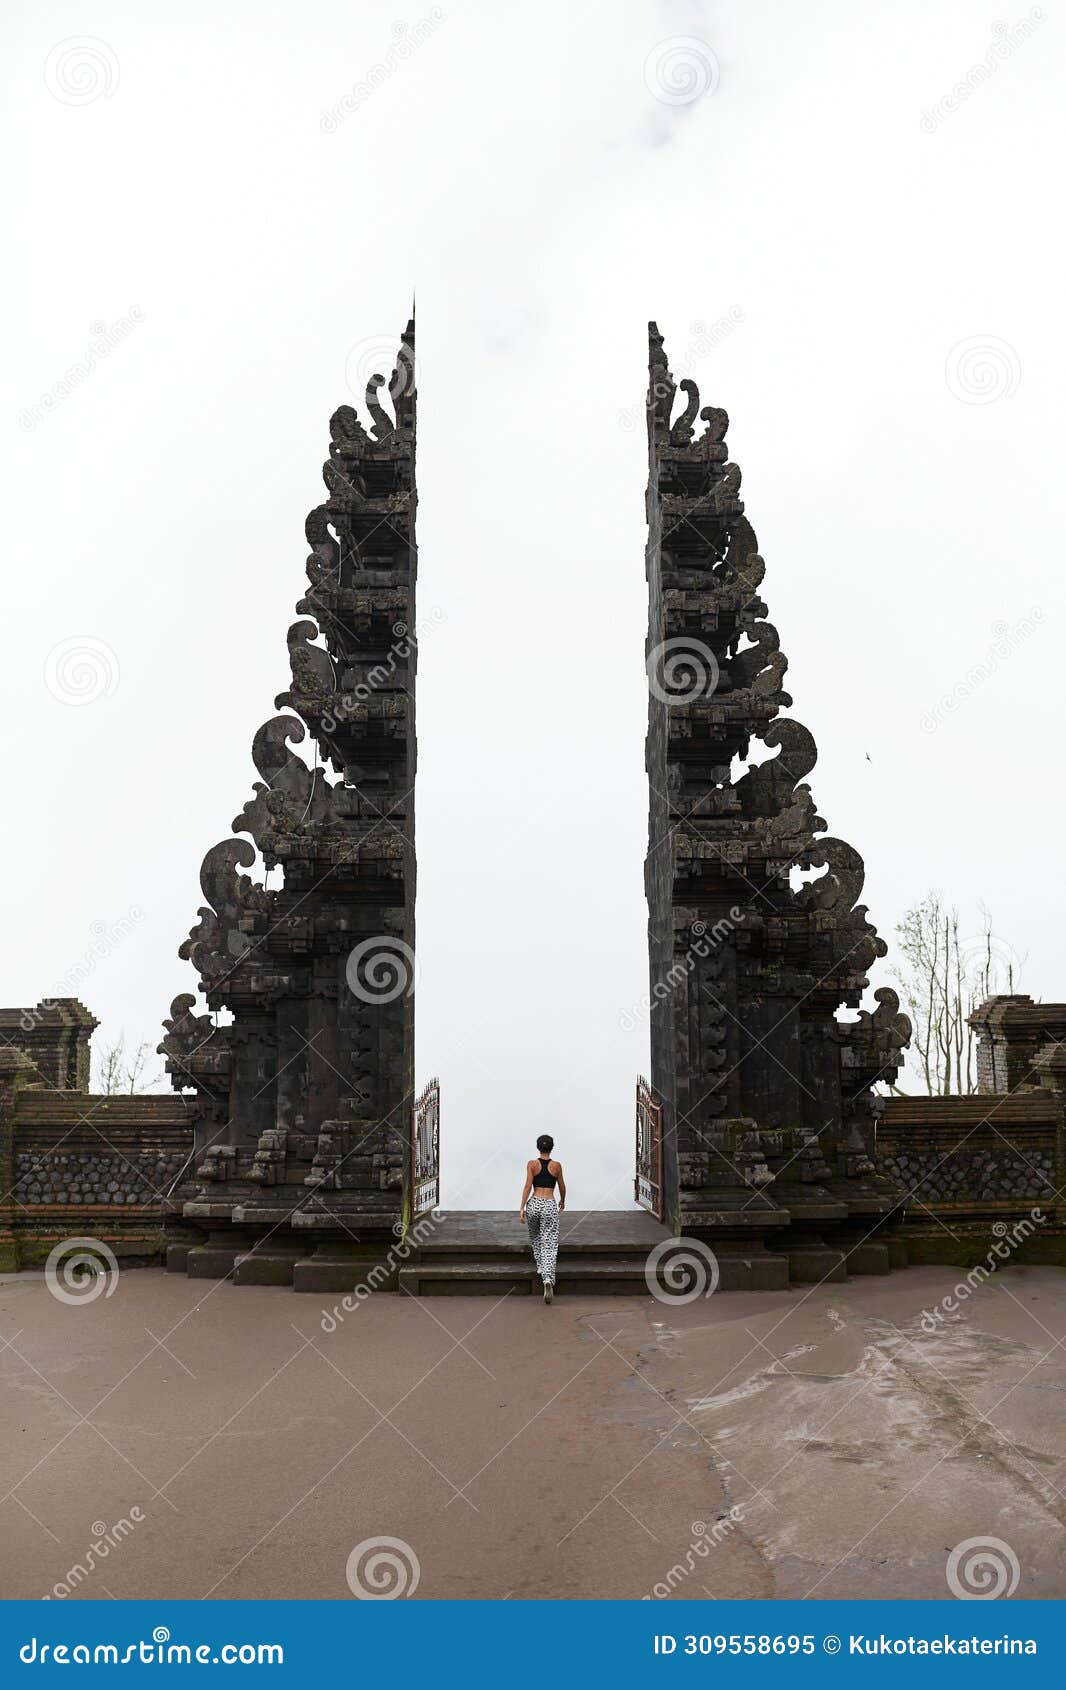 a woman stands at the balinese traditional gate in the clouds at the sacred temple of pura pasar agung sebudi on mount agung